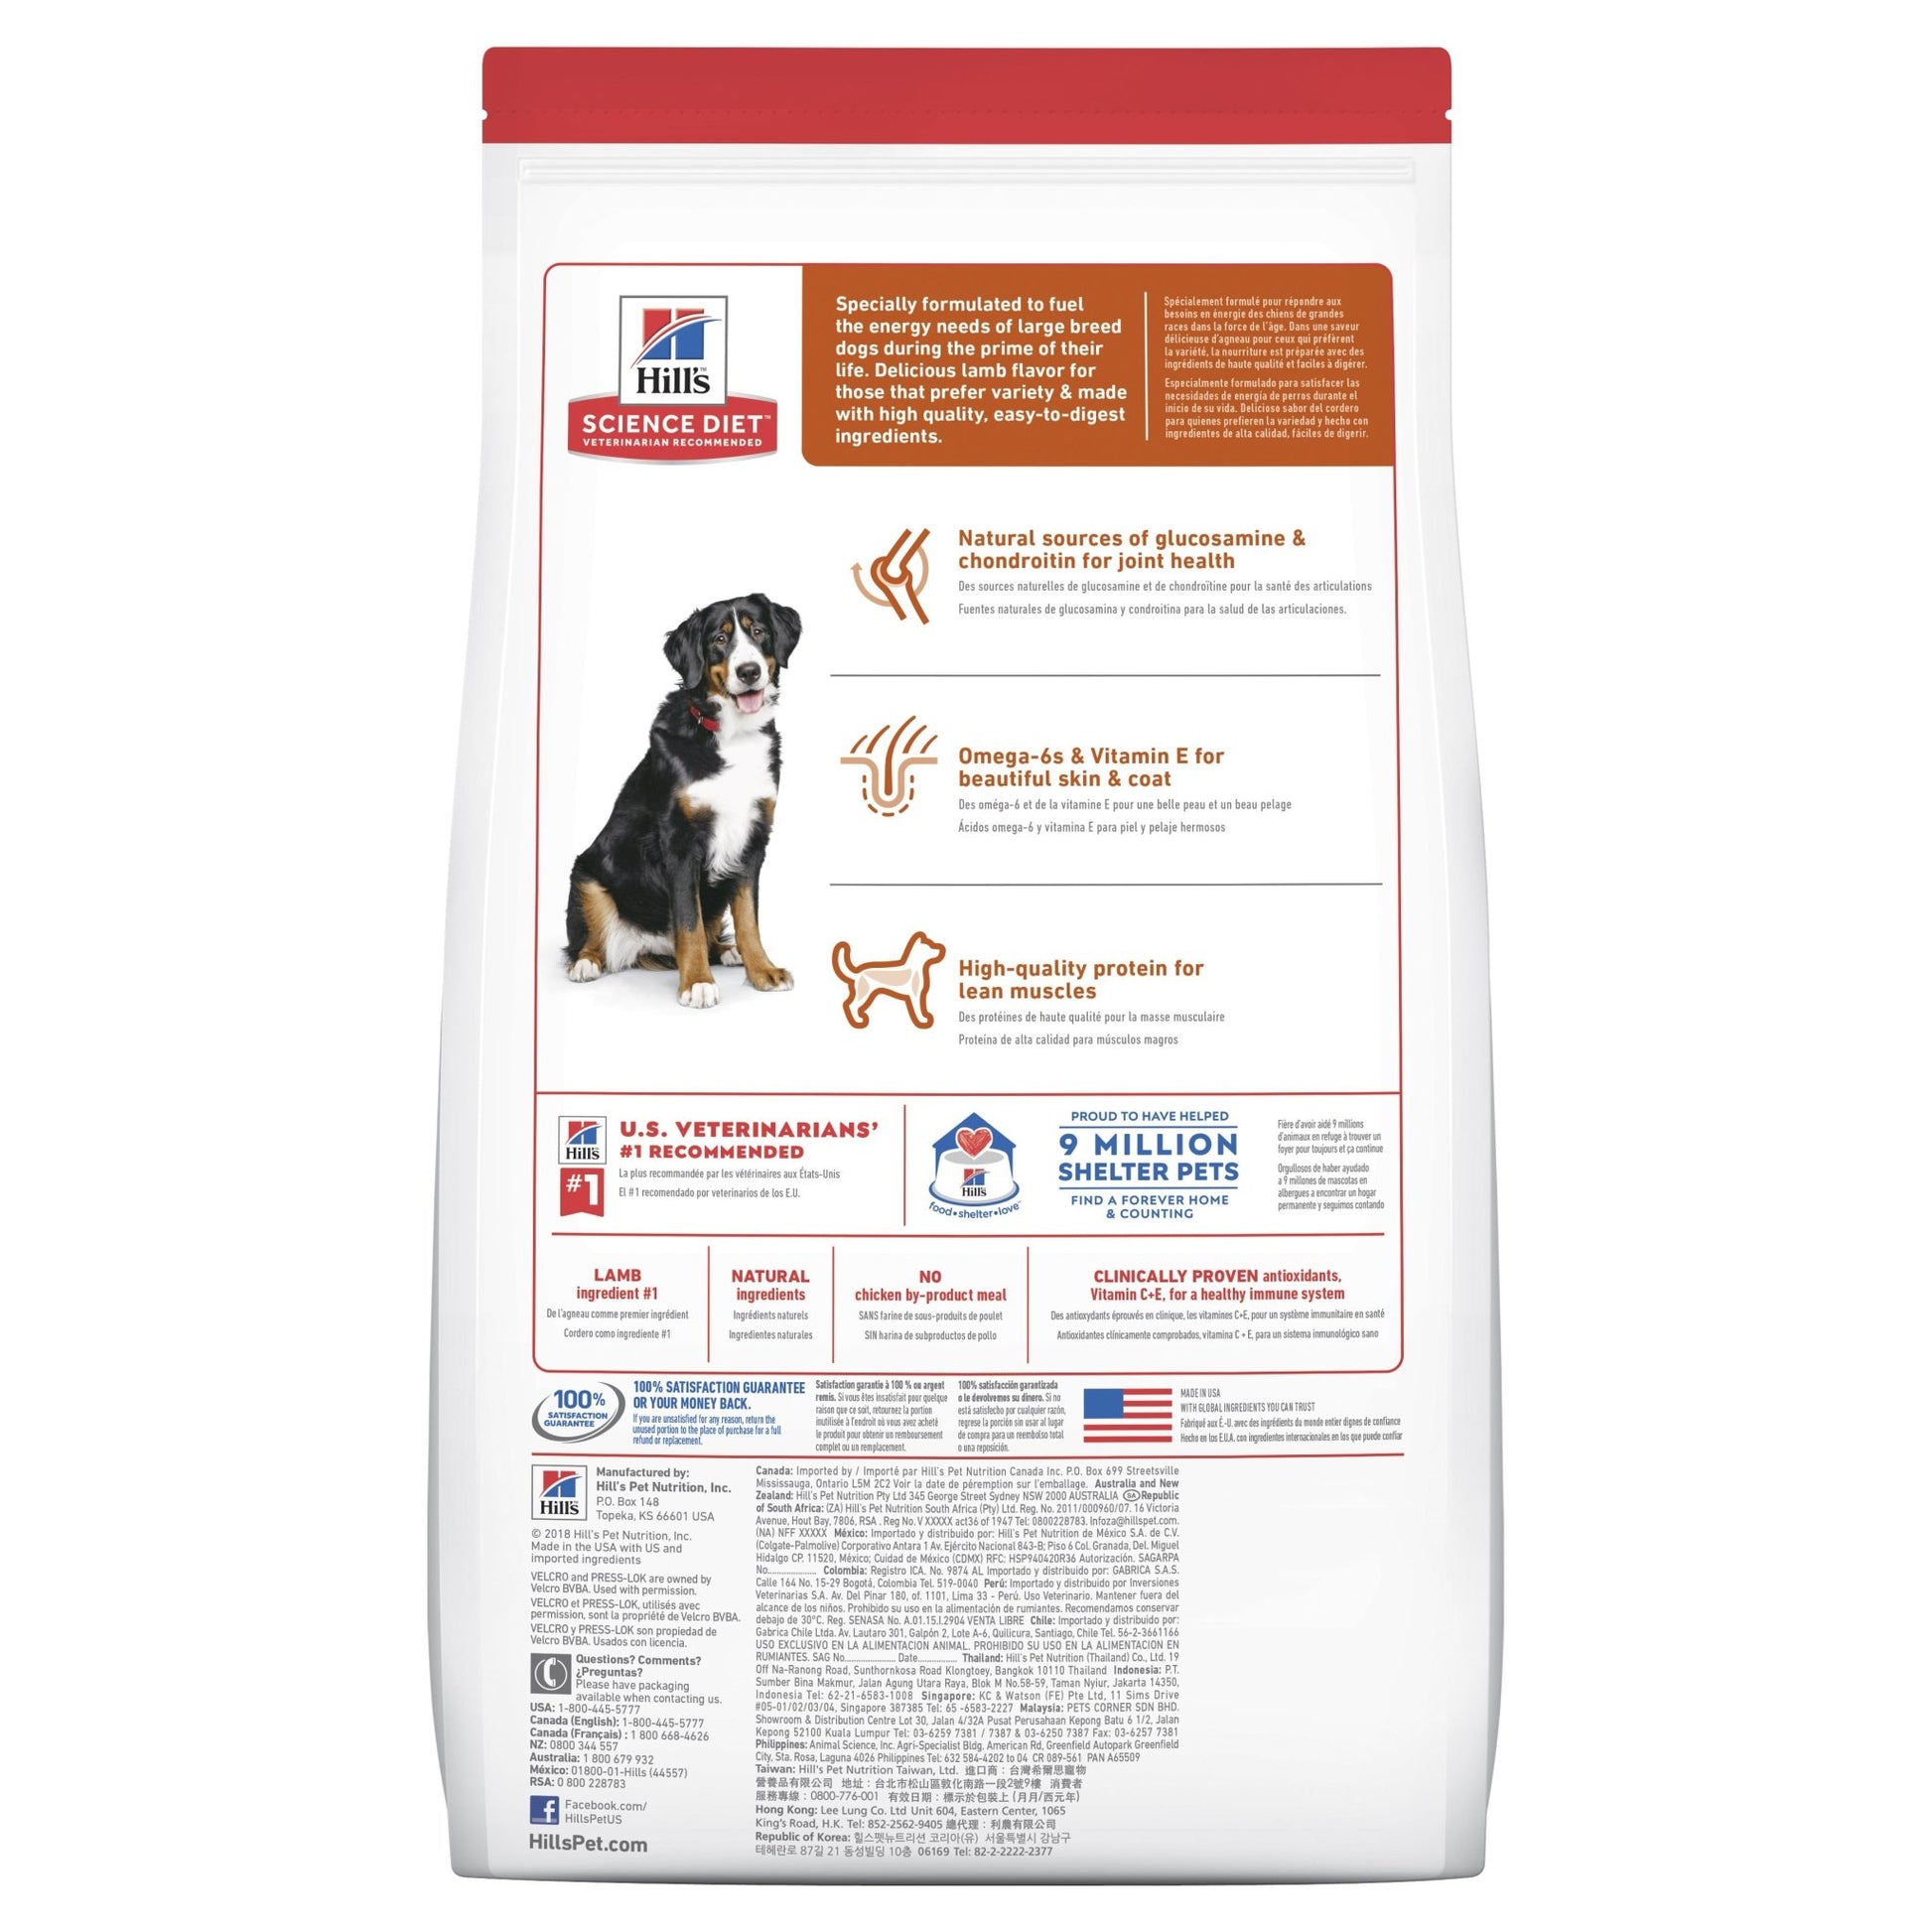 Hill's Science Diet Adult Large Breed Lamb & Brown Rice Dry Dog Food 14.97kg - Woonona Petfood & Produce